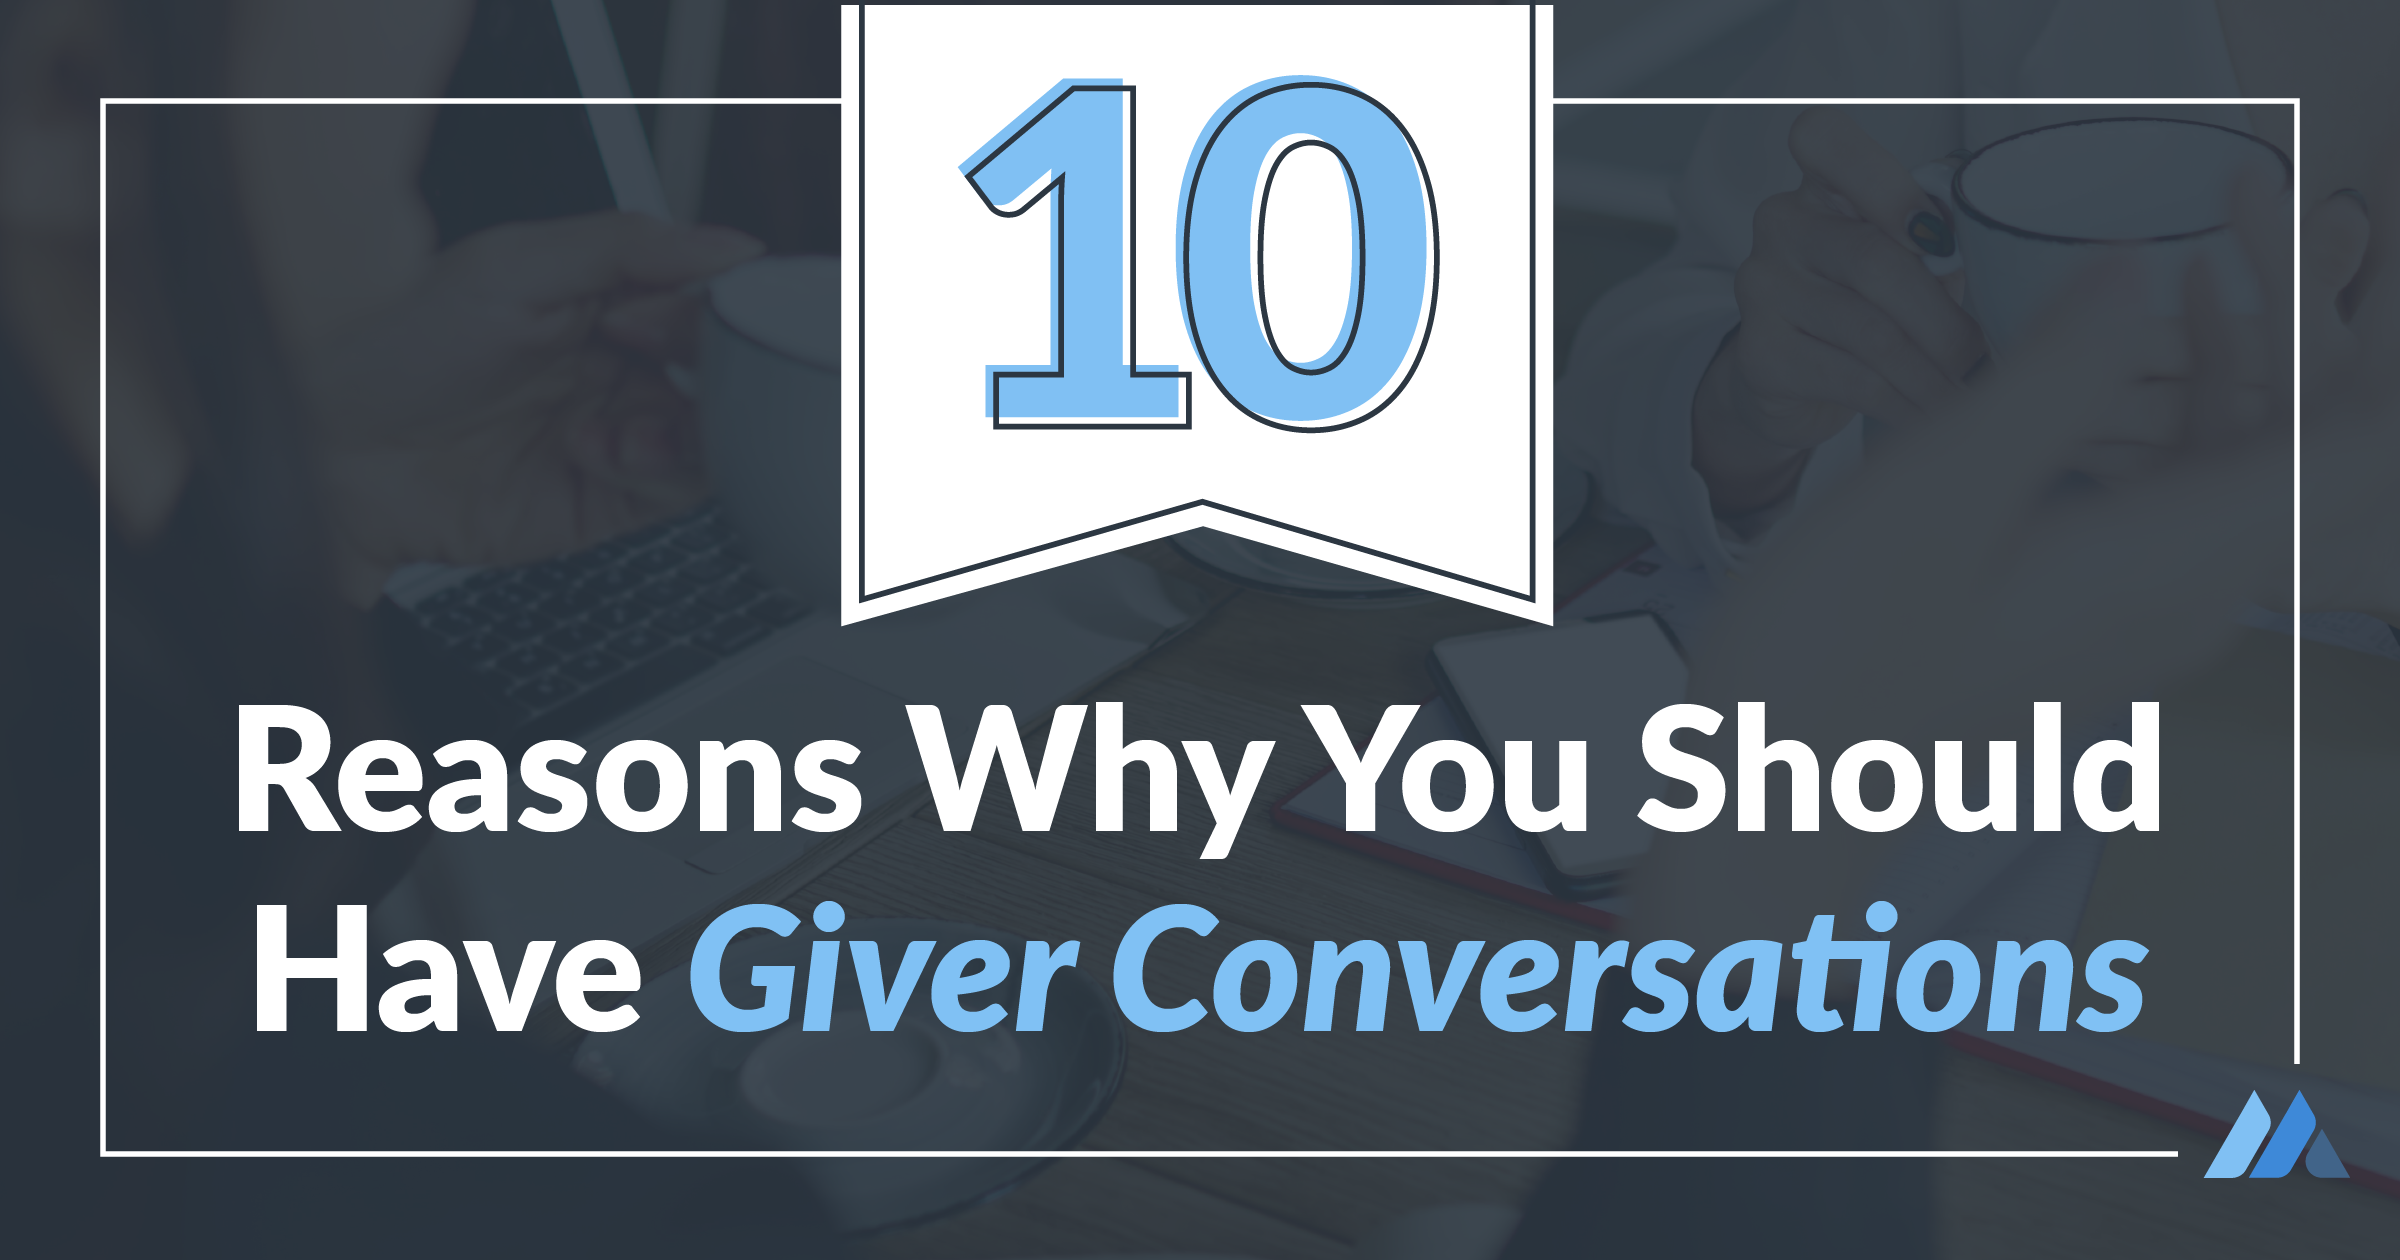 10 Reasons Why You Should Have Giver Conversations